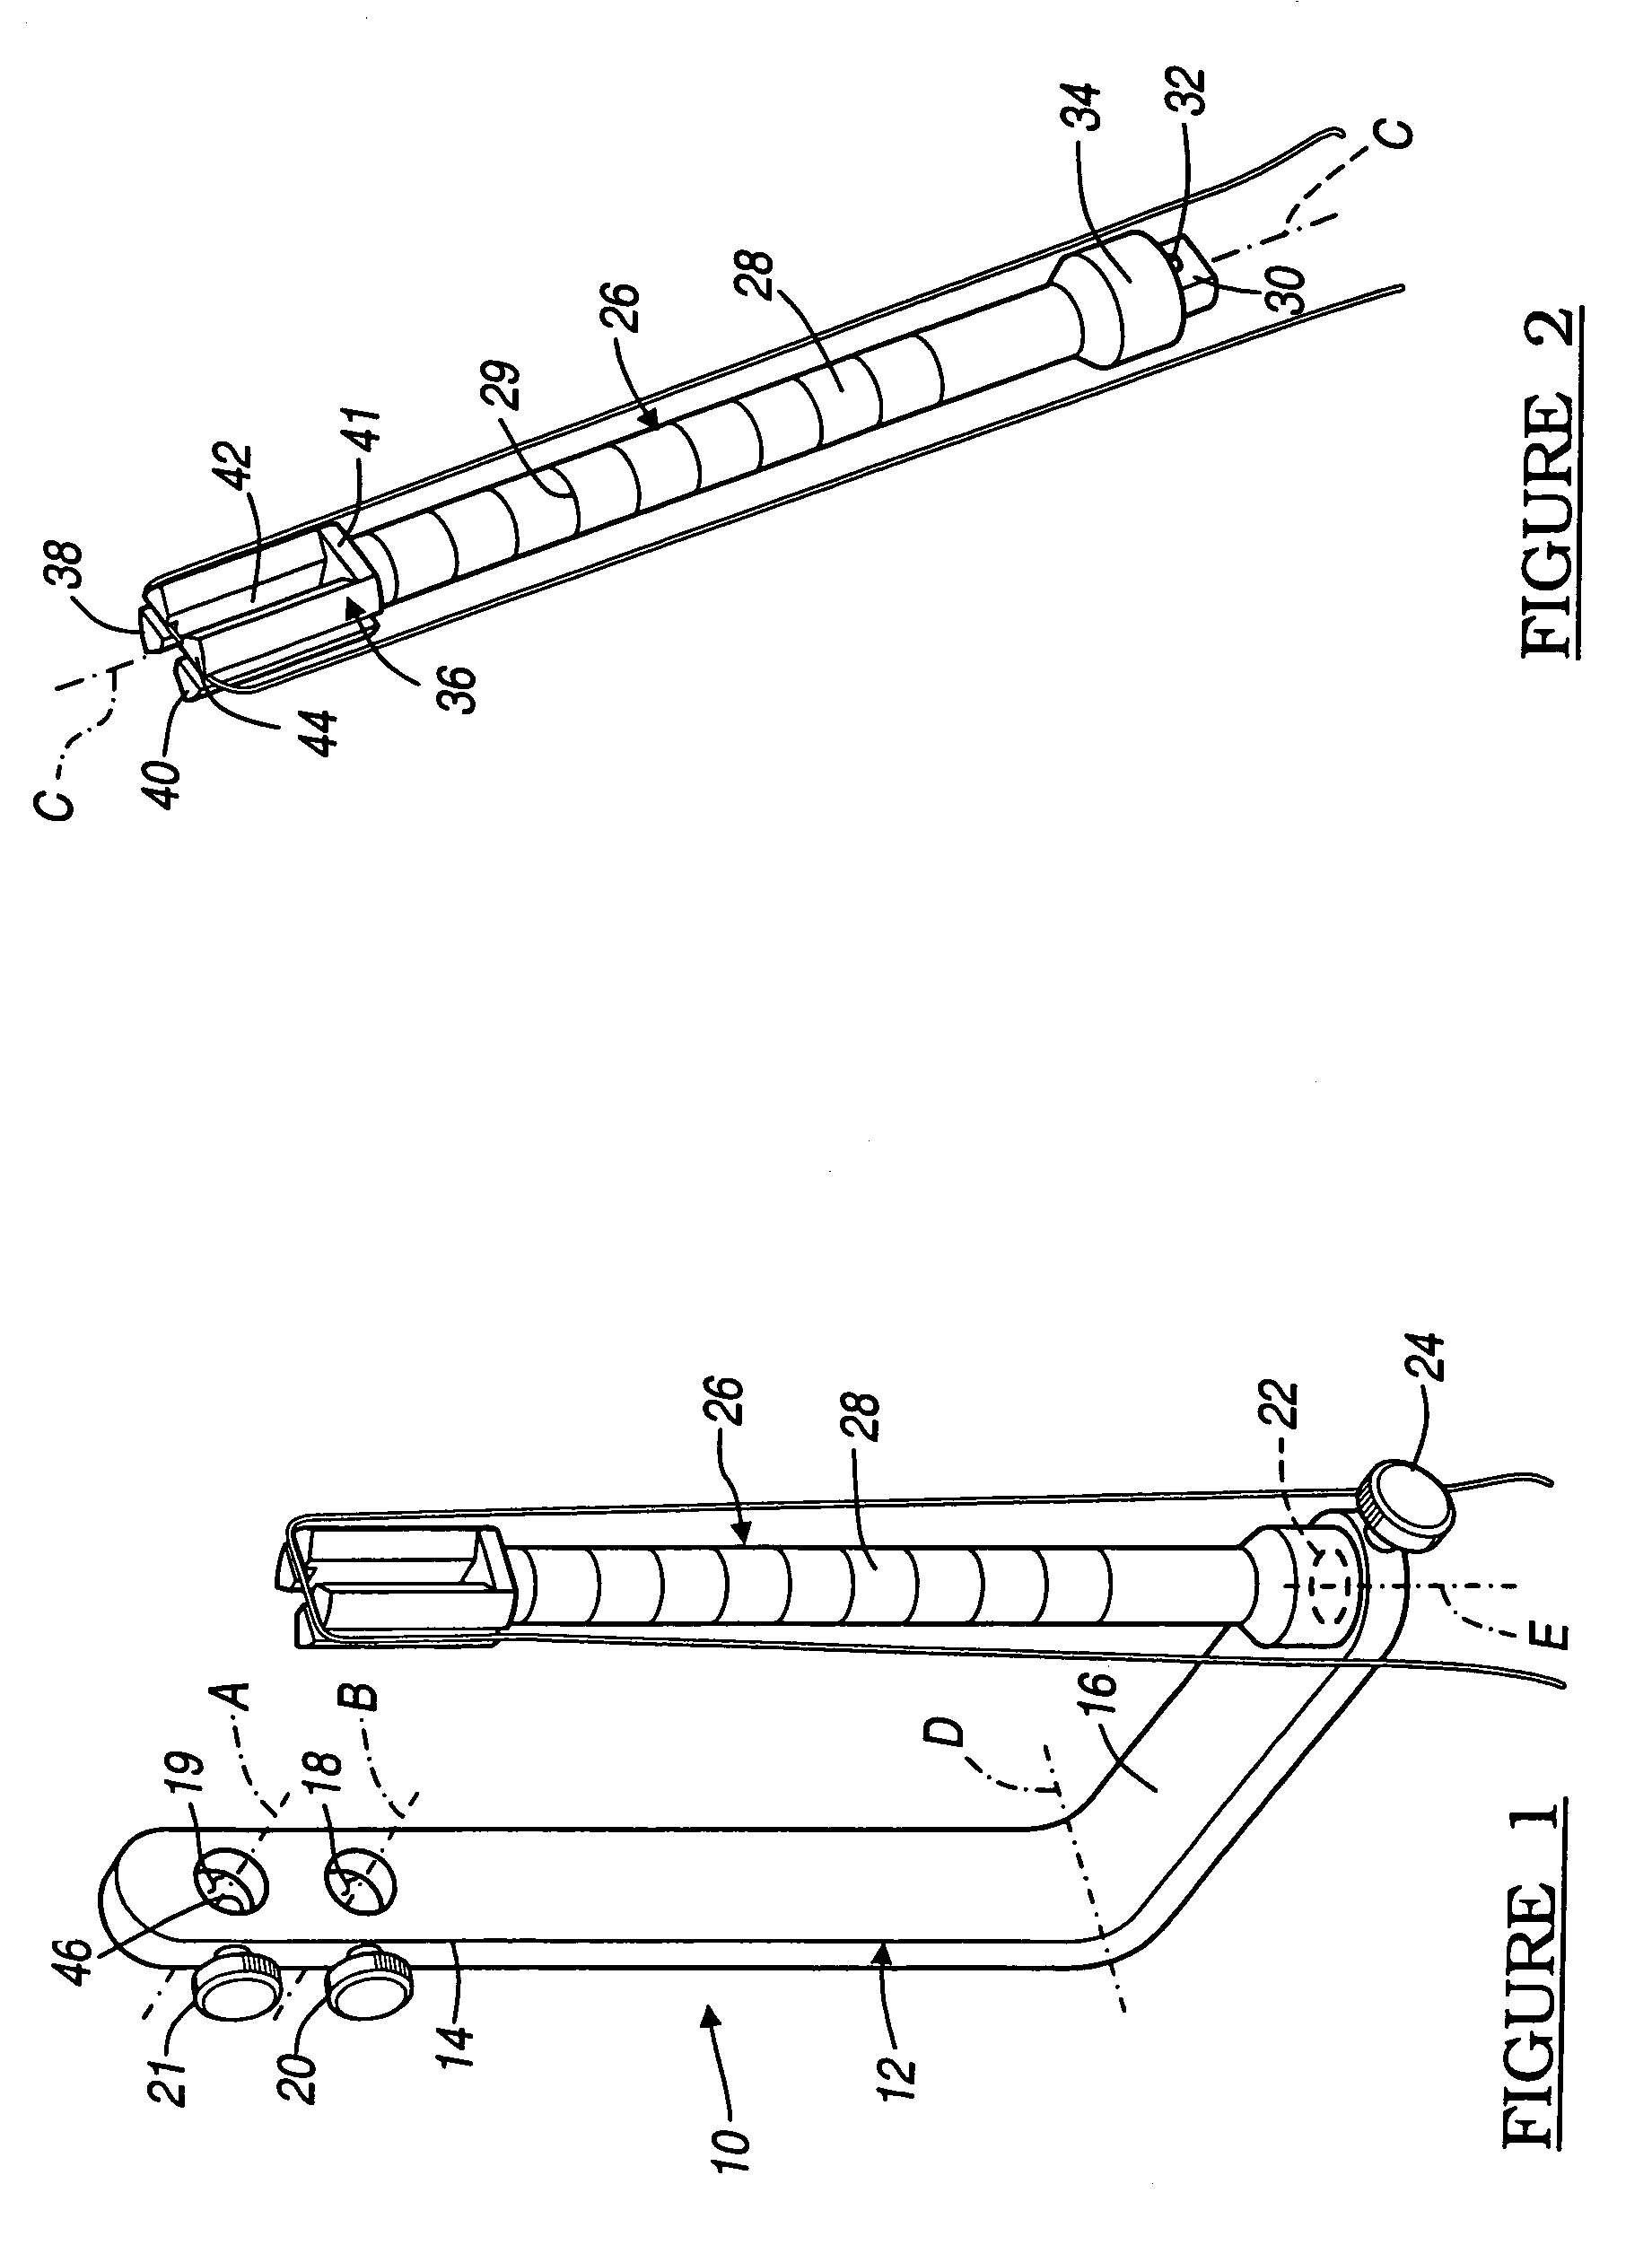 Method and apparatus for graft fixation